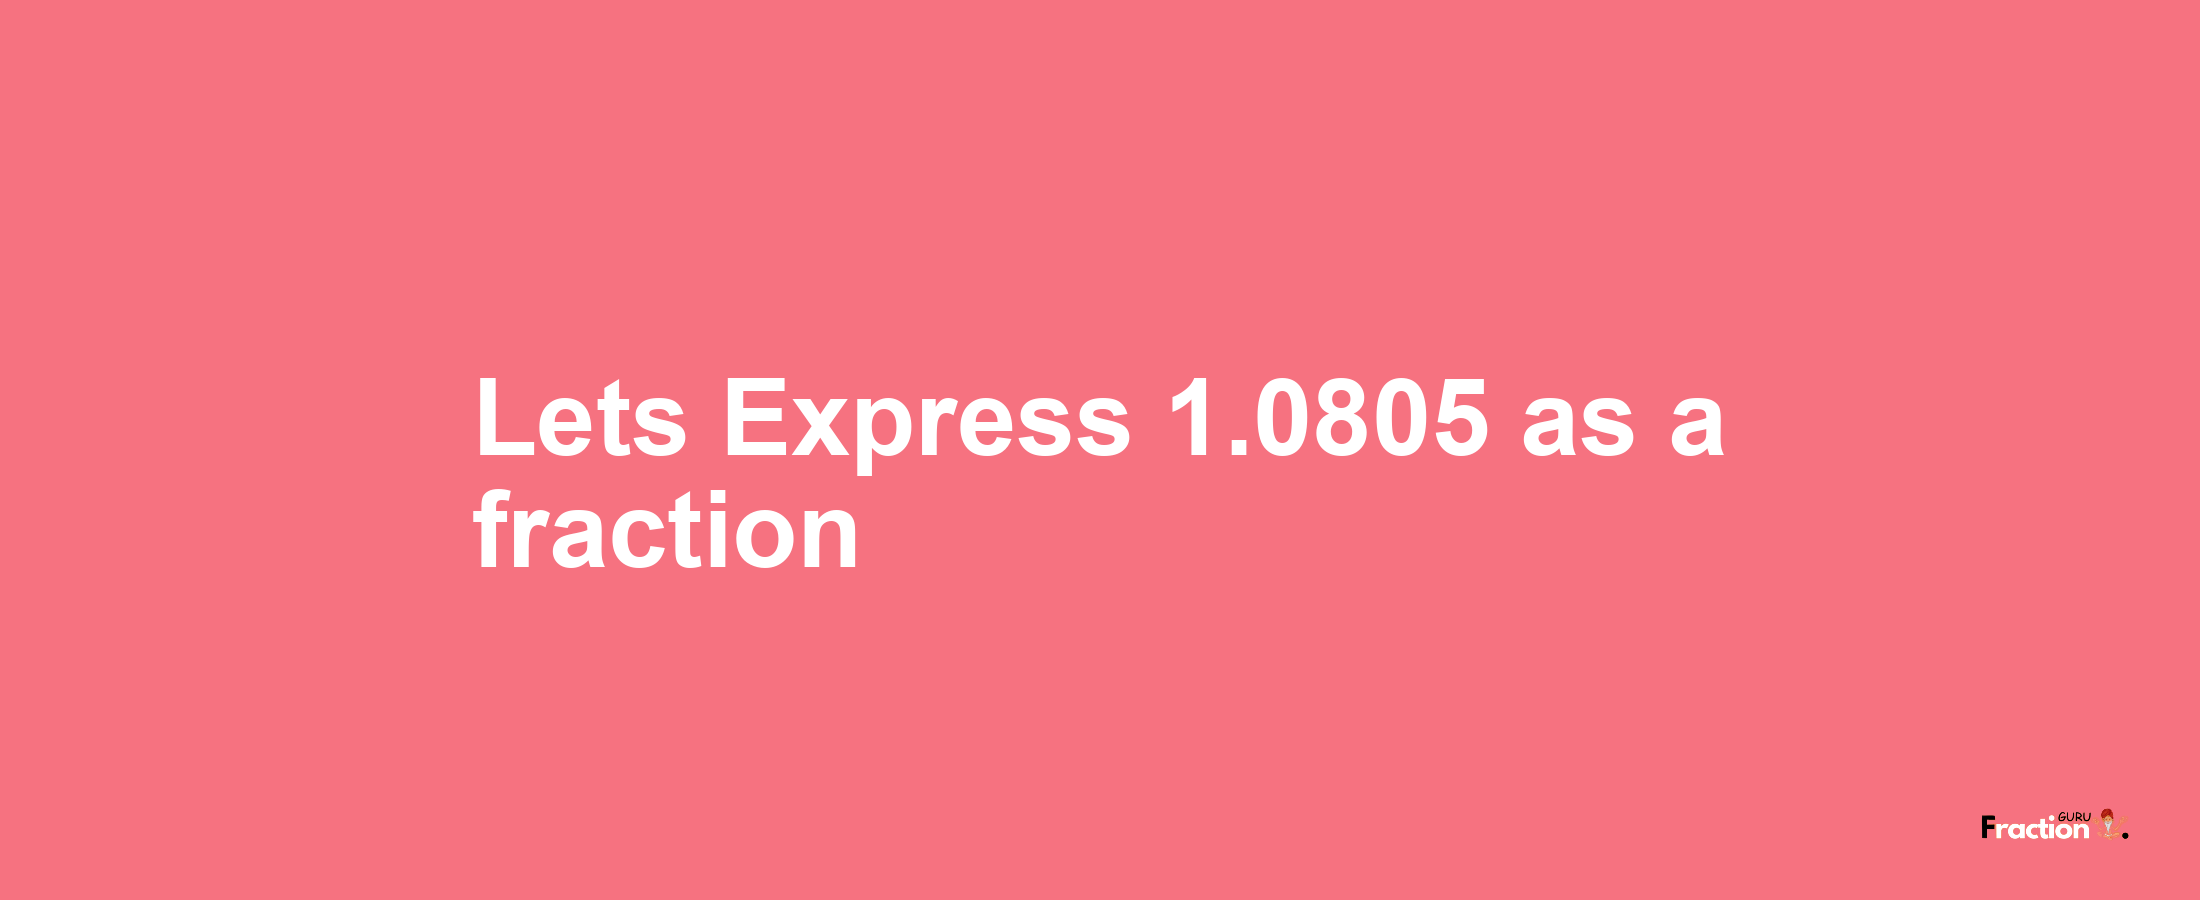 Lets Express 1.0805 as afraction